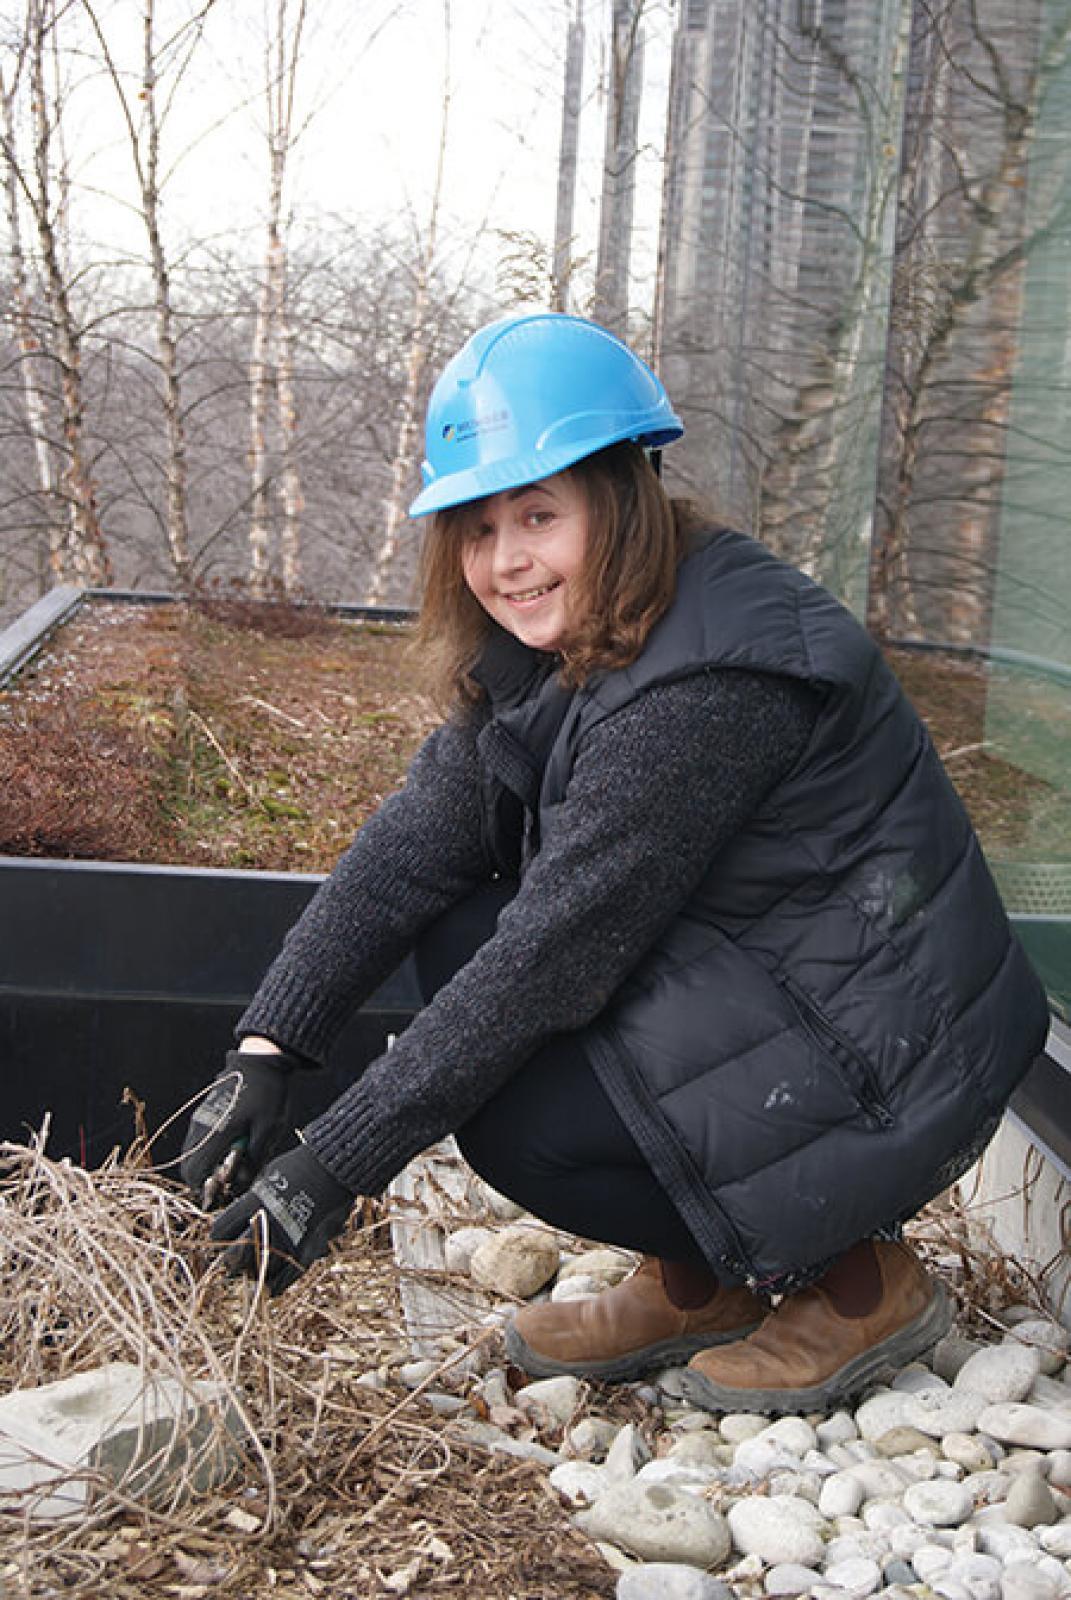 Corina Ottnad changed careers to pursue her passions for both the environment and horticulture therapy.